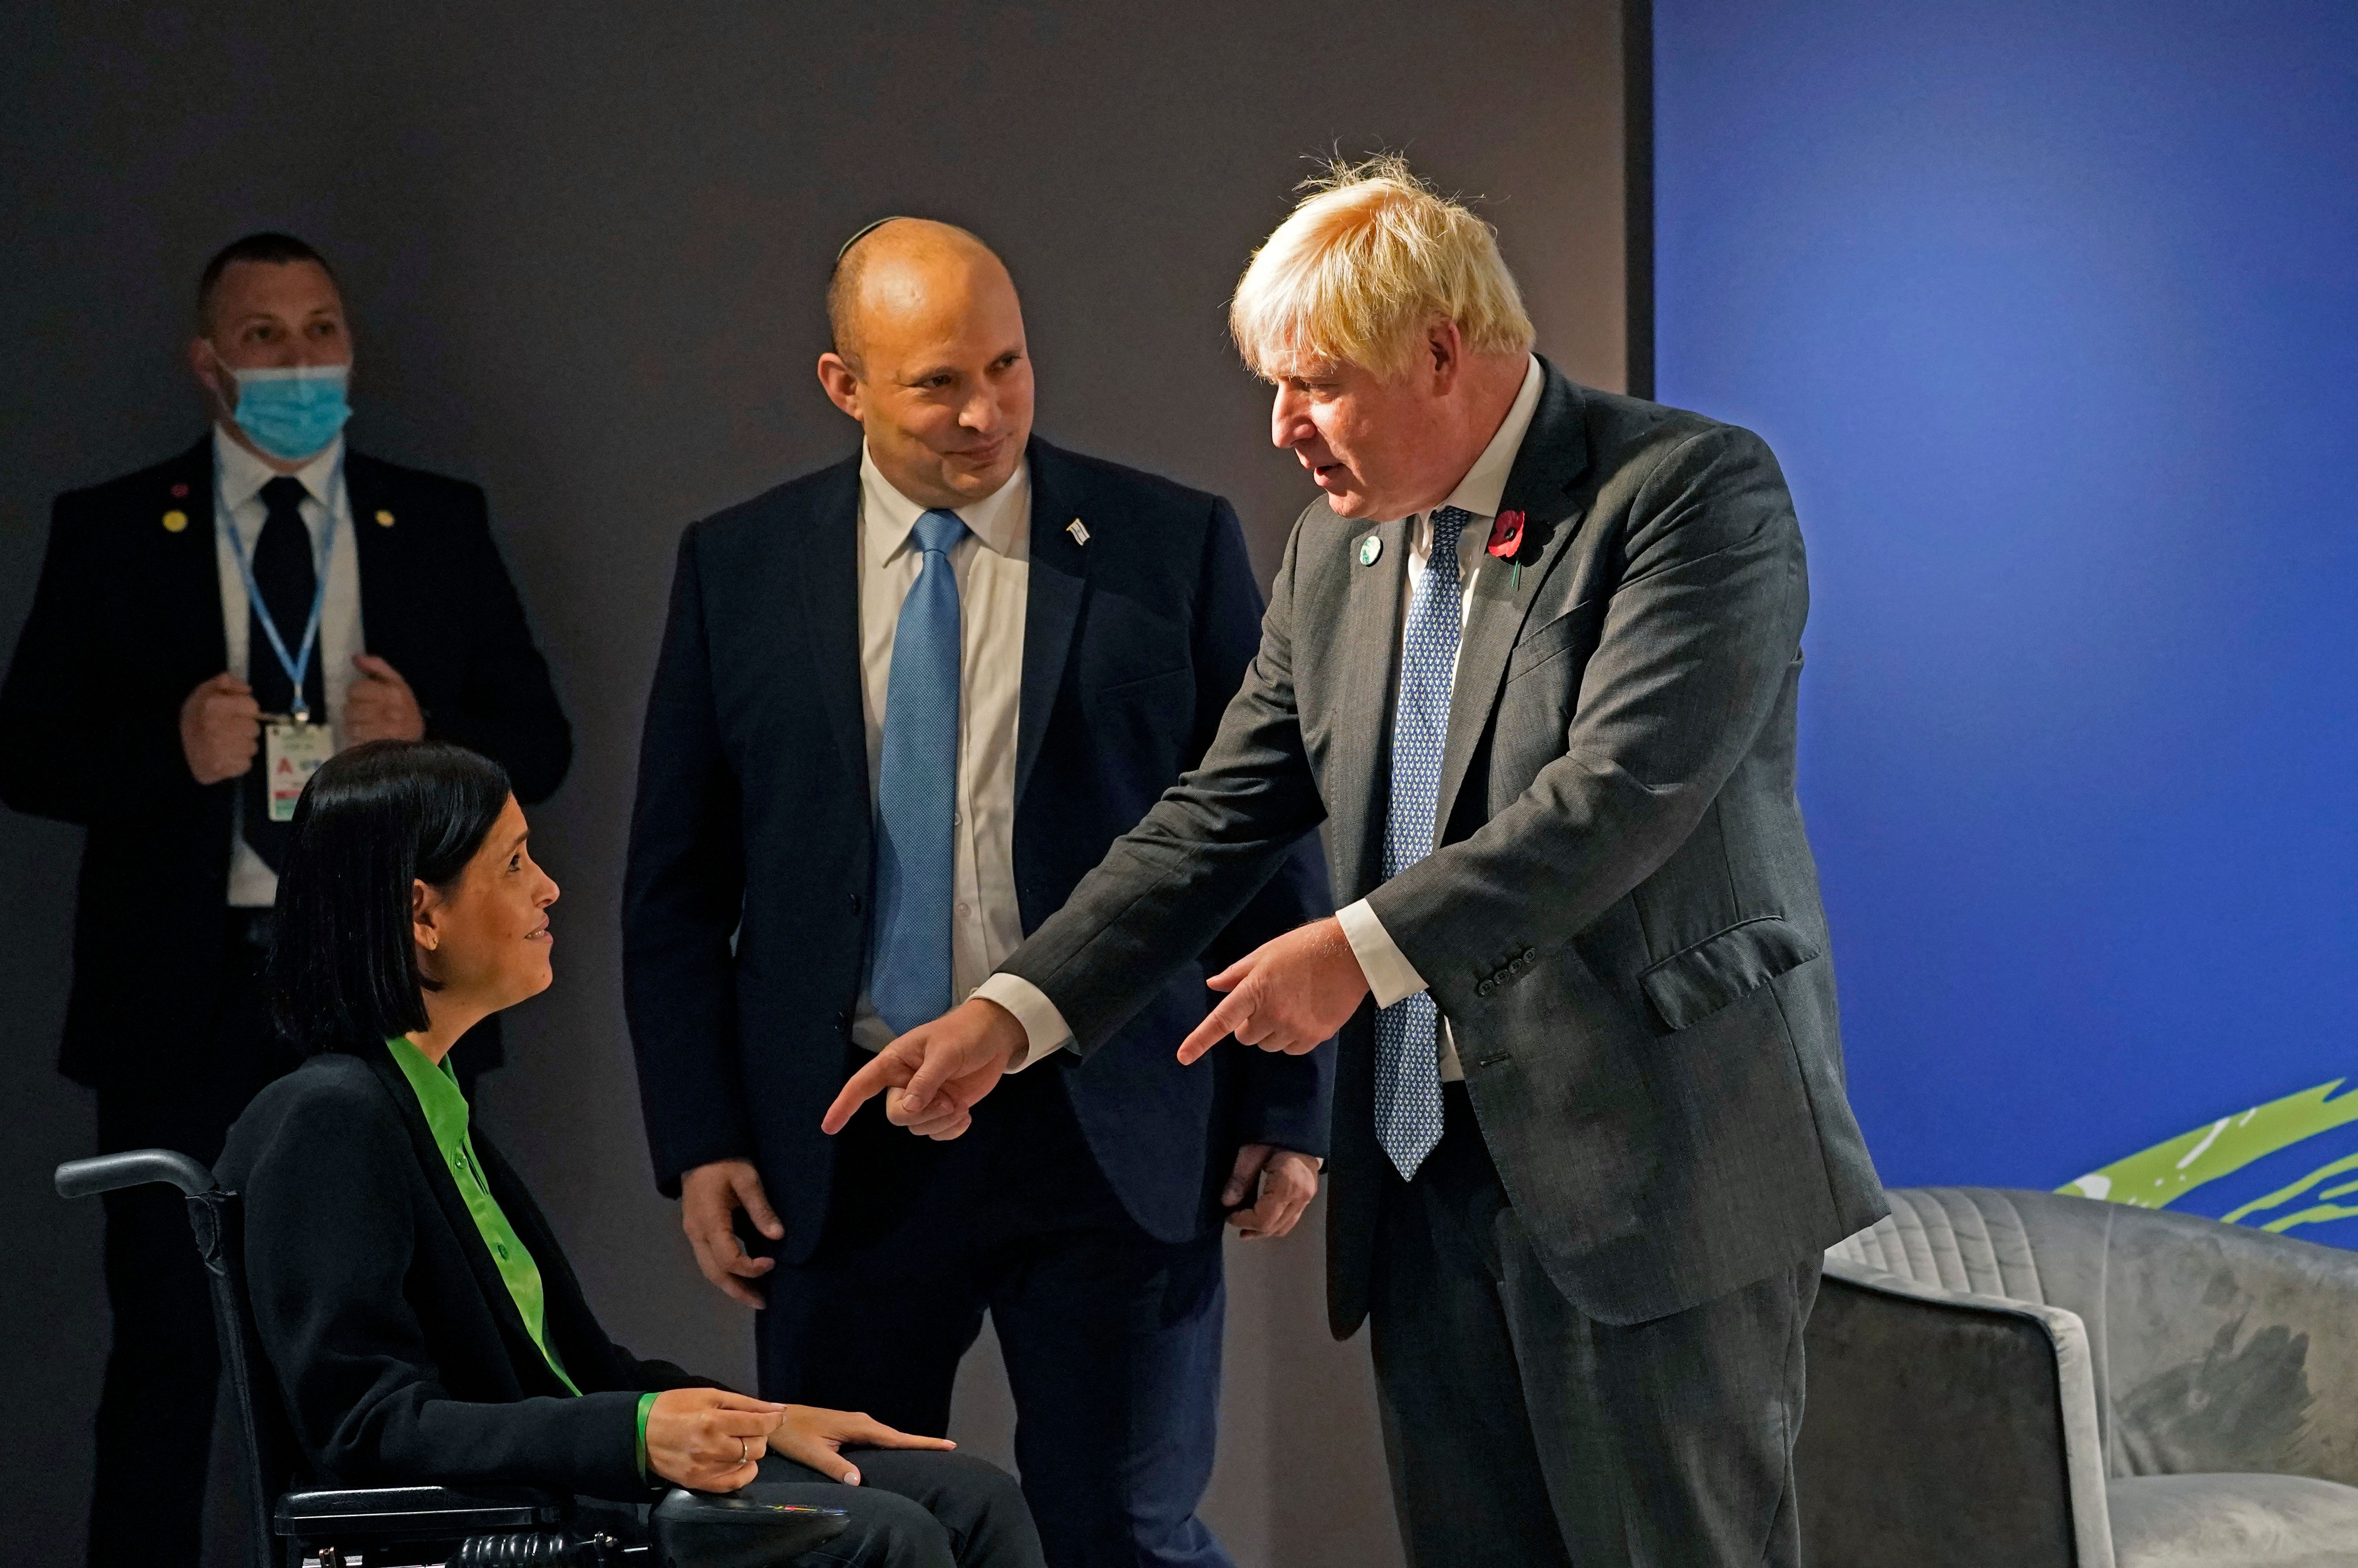 Britain's Prime Minister Boris Johnson, right, is introduced to Israel's Energy Minister Karine Elharrar, as Israel's Prime Minister Naftali Bennett, looks on, during the COP26 Climate Conference at the Scottish Event Campus in Glasgow, Scotland on Tuesday. 